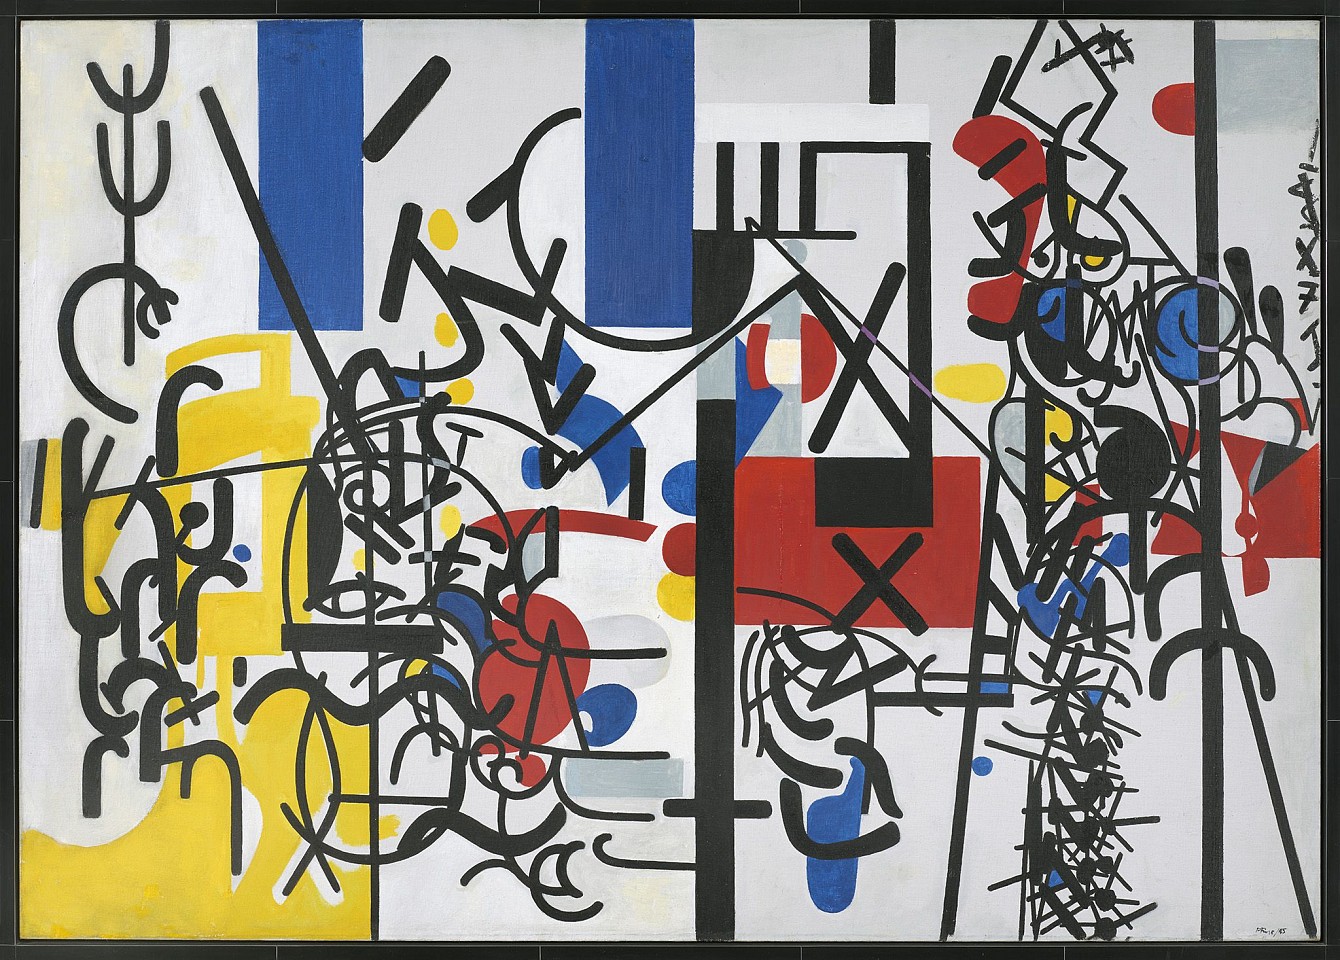 Perle Fine, Grand March Opening Theme, 1945
Oil on canvas, 42 x 59 1/2 in. (106.7 x 151.1 cm)
FIN-00146